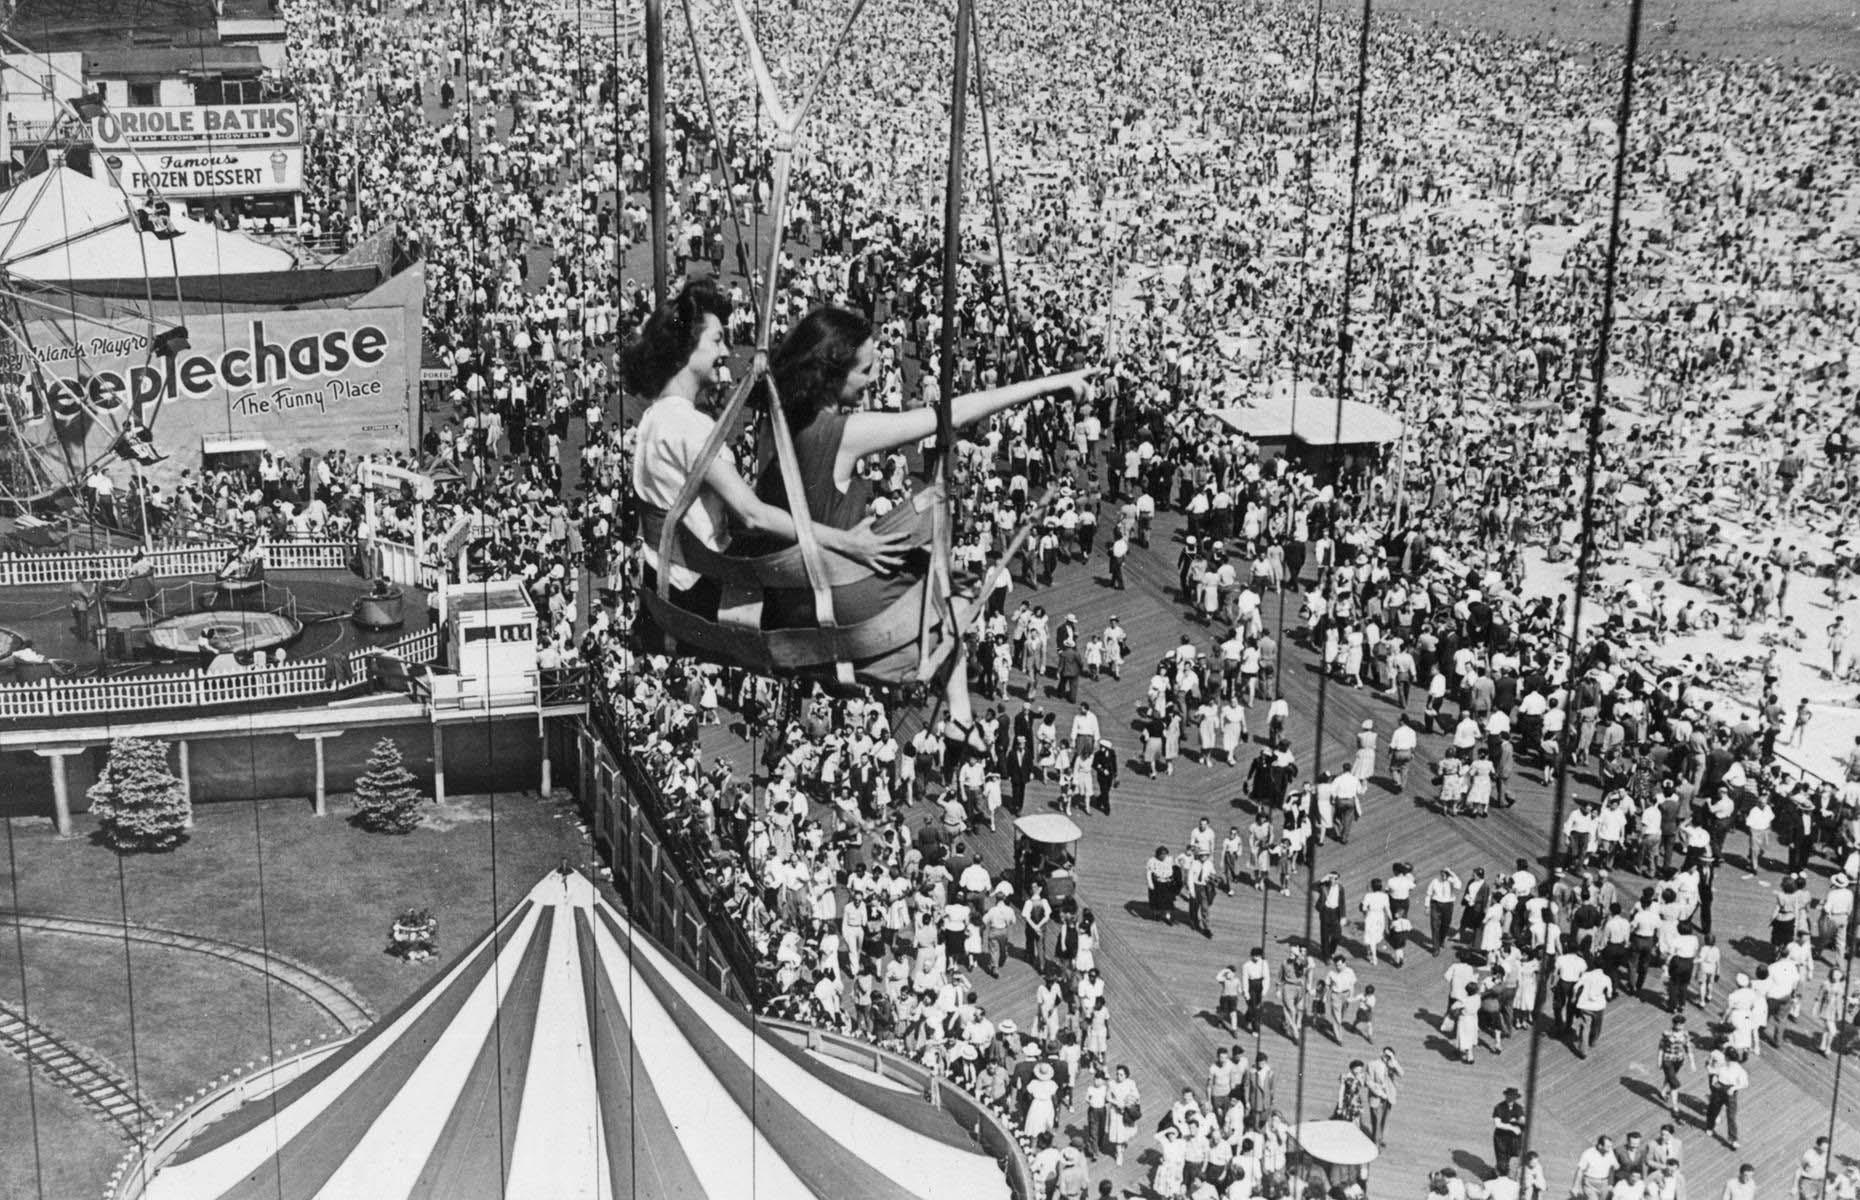 <p>The pleasure playground that is Coney Island attracted vacationers from Europe and across the US. Its development dates back to the 1840s and in the early 1900s it was the country's largest amusement park. This 1940s shot shows vacationers on Coney Island’s now defunct parachute ride, as well as hordes of tourists on the sandy beach. A series of fires throughout this decade would put Coney Island’s future at risk, though the seaside resort remains beloved today.</p>  <p><strong><a href="https://www.loveexploring.com/galleries/92839/stunning-historic-images-of-theme-parks-in-full-swing?page=1">Vintage images of theme parks from times gone by</a></strong></p>